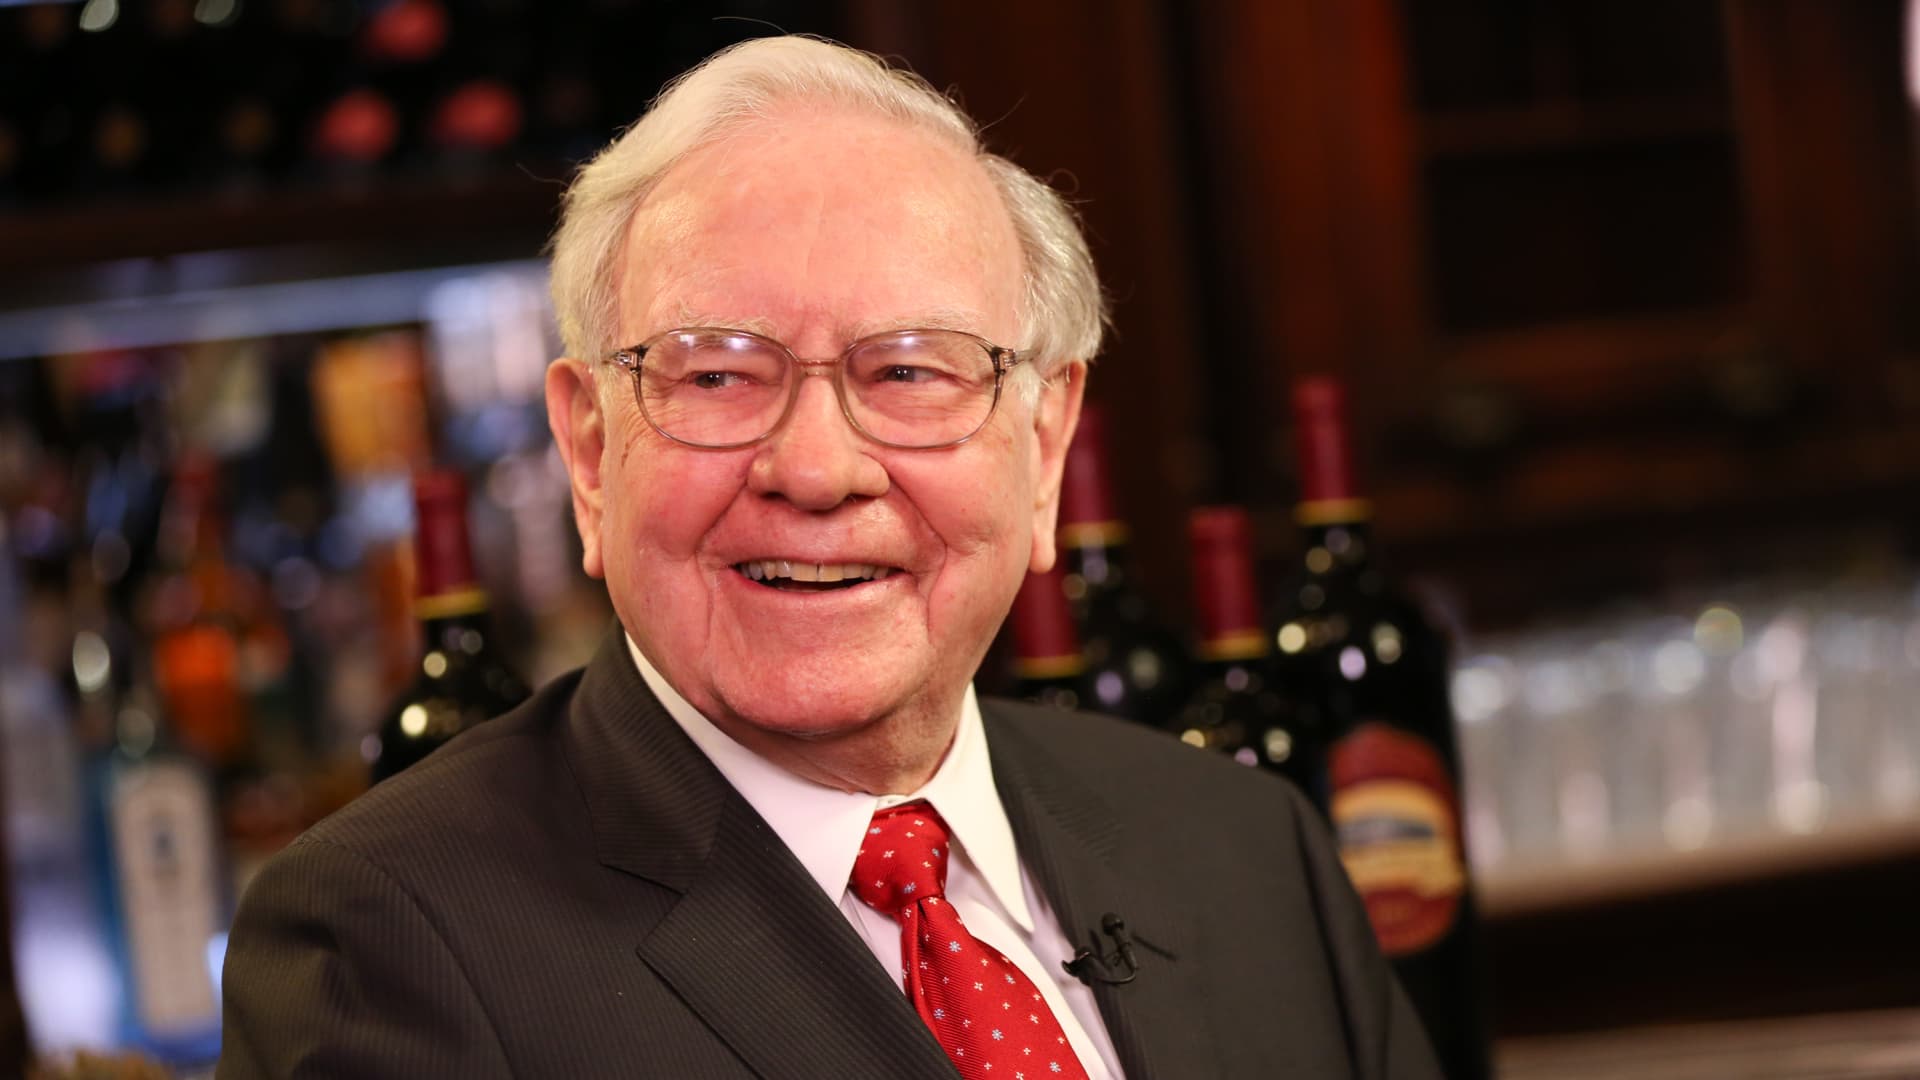 Berkshire Hathaway rises as traders cheer sturdy earnings and Buffett’s near-record income stockpile